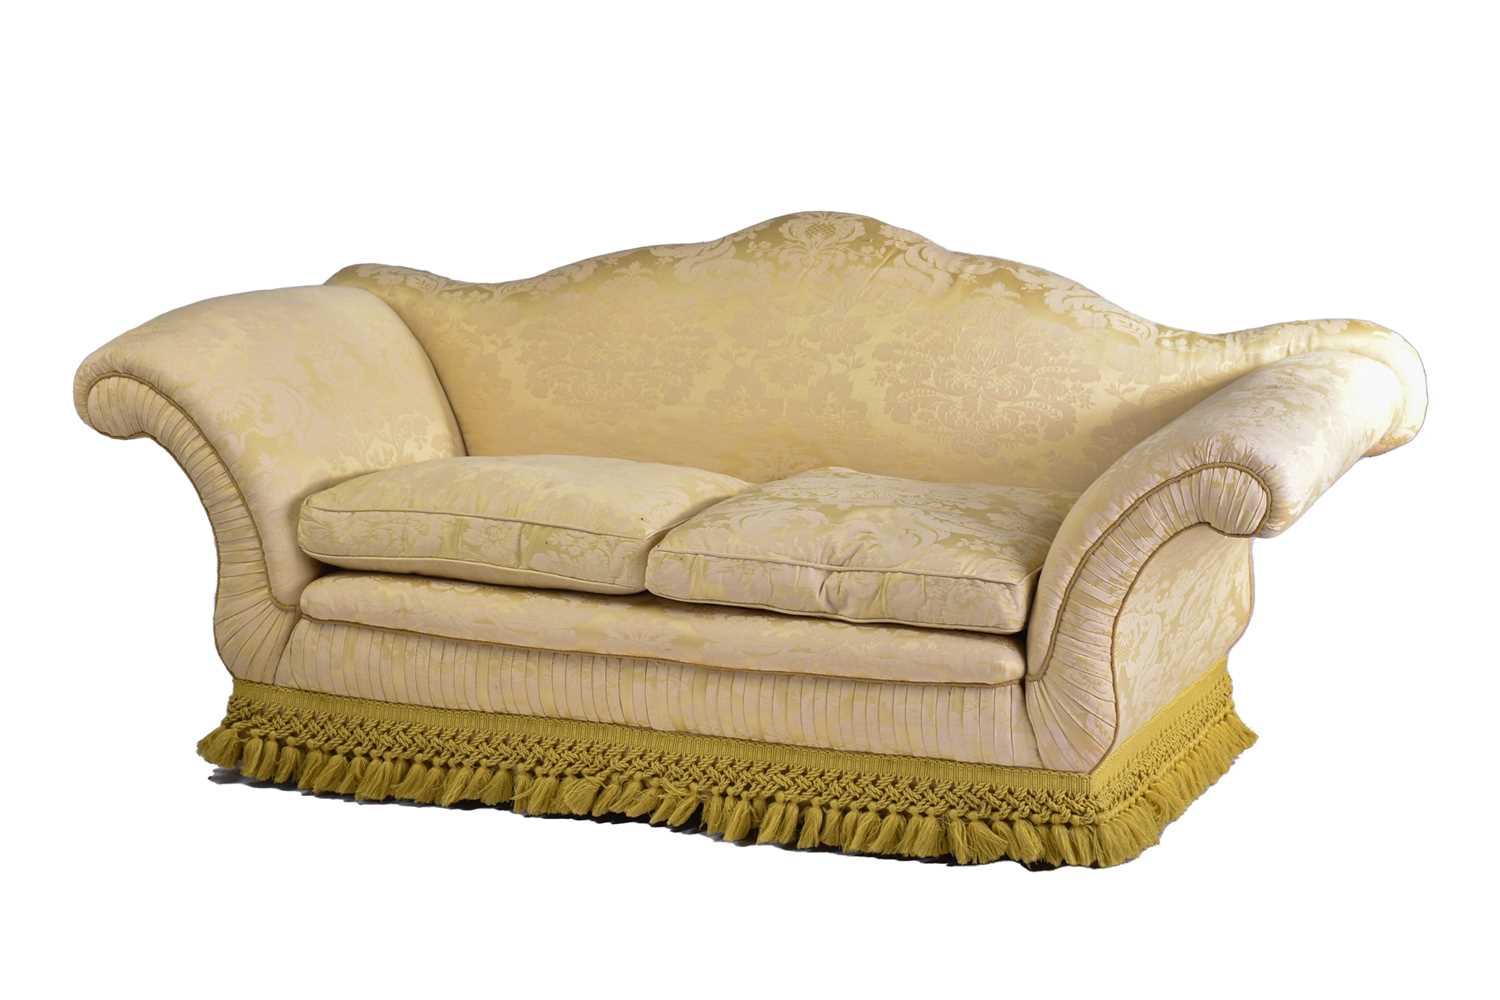 A pair of Harrods camel back two-seat sofas with stuff over pale gold Damask upholstery with - Image 11 of 12